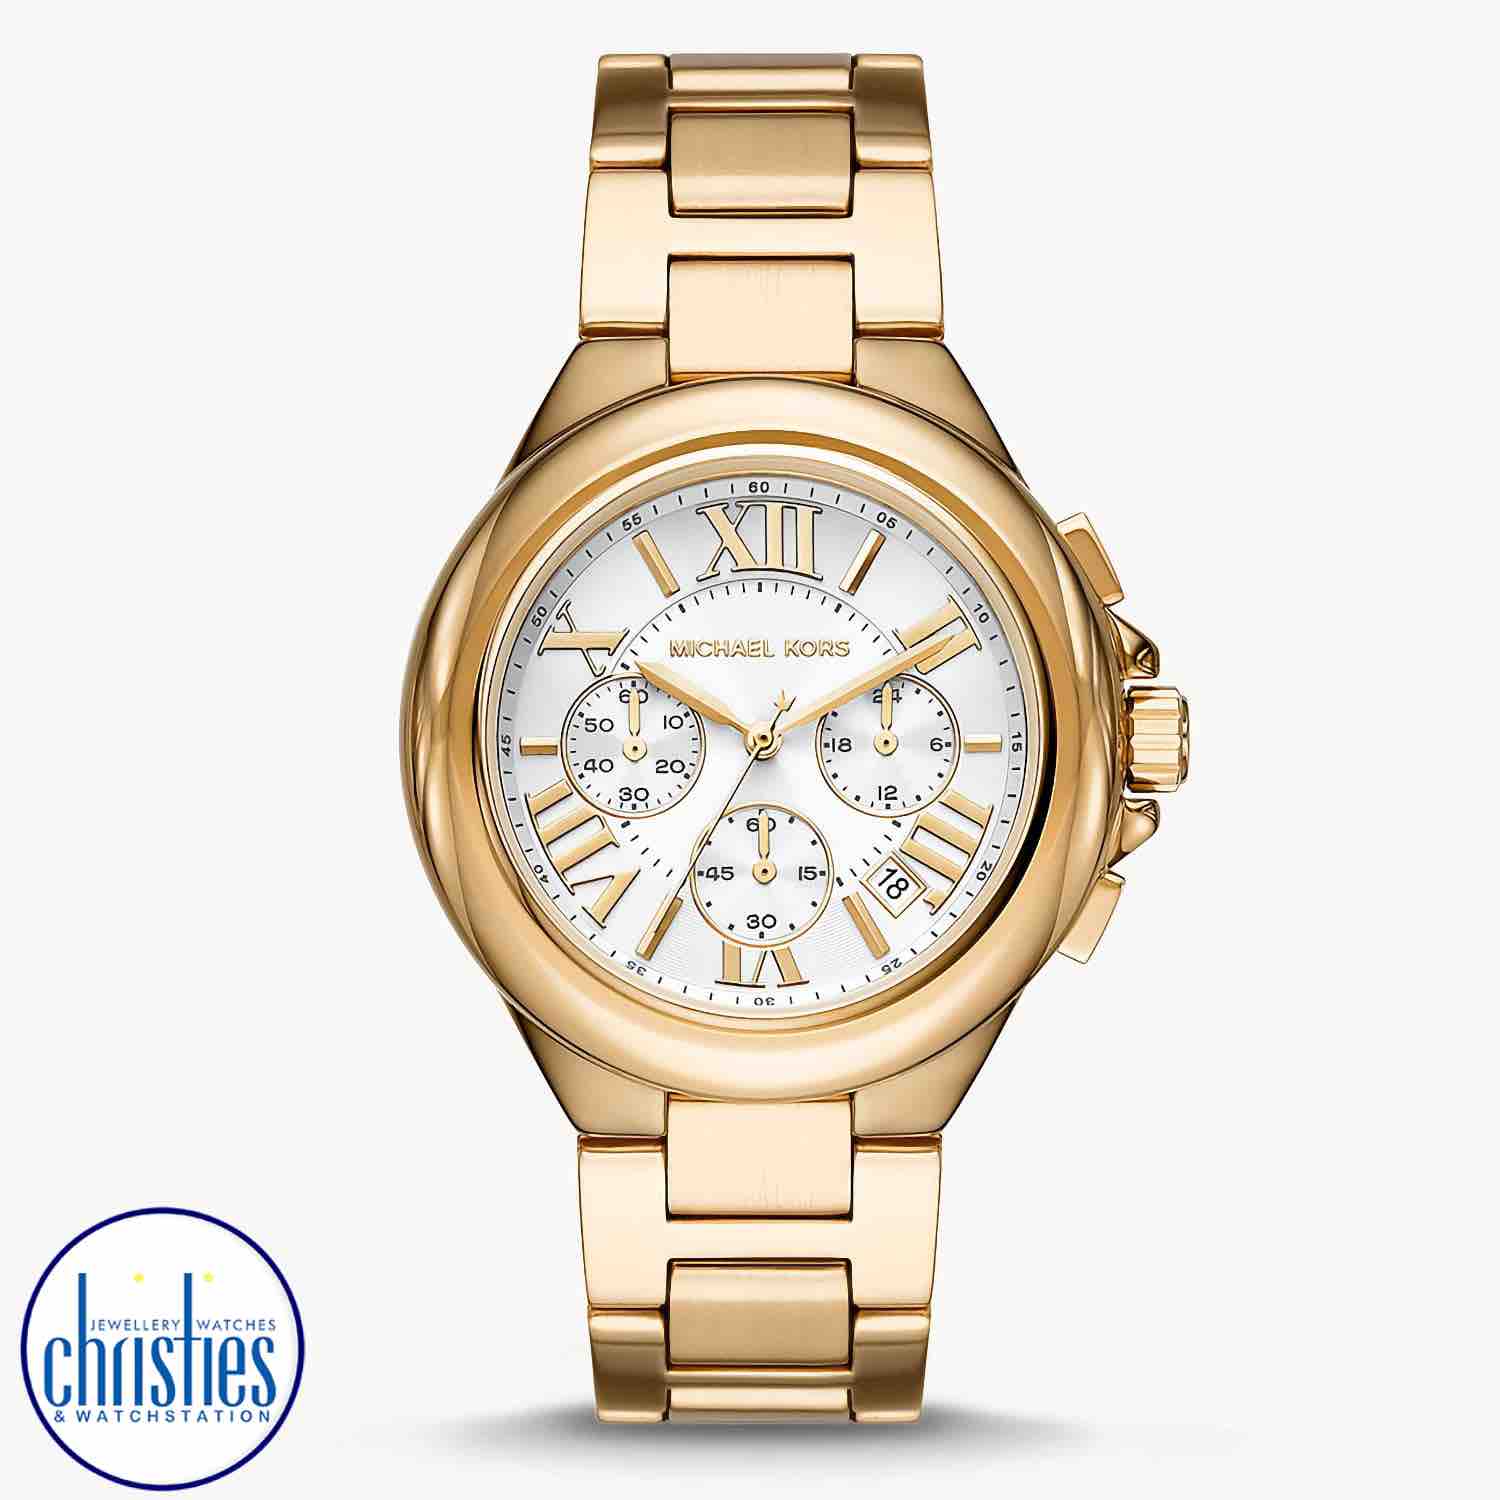 MK7270  Michael Kors Camille Chronograph Gold-Tone Watch. MK7270  Michael Kors Camille Chronograph Gold-Tone Stainless Steel WatchAfterpay - Split your purchase into 4 instalments - Pay for your purchase over 4 instalments, due every two weeks.